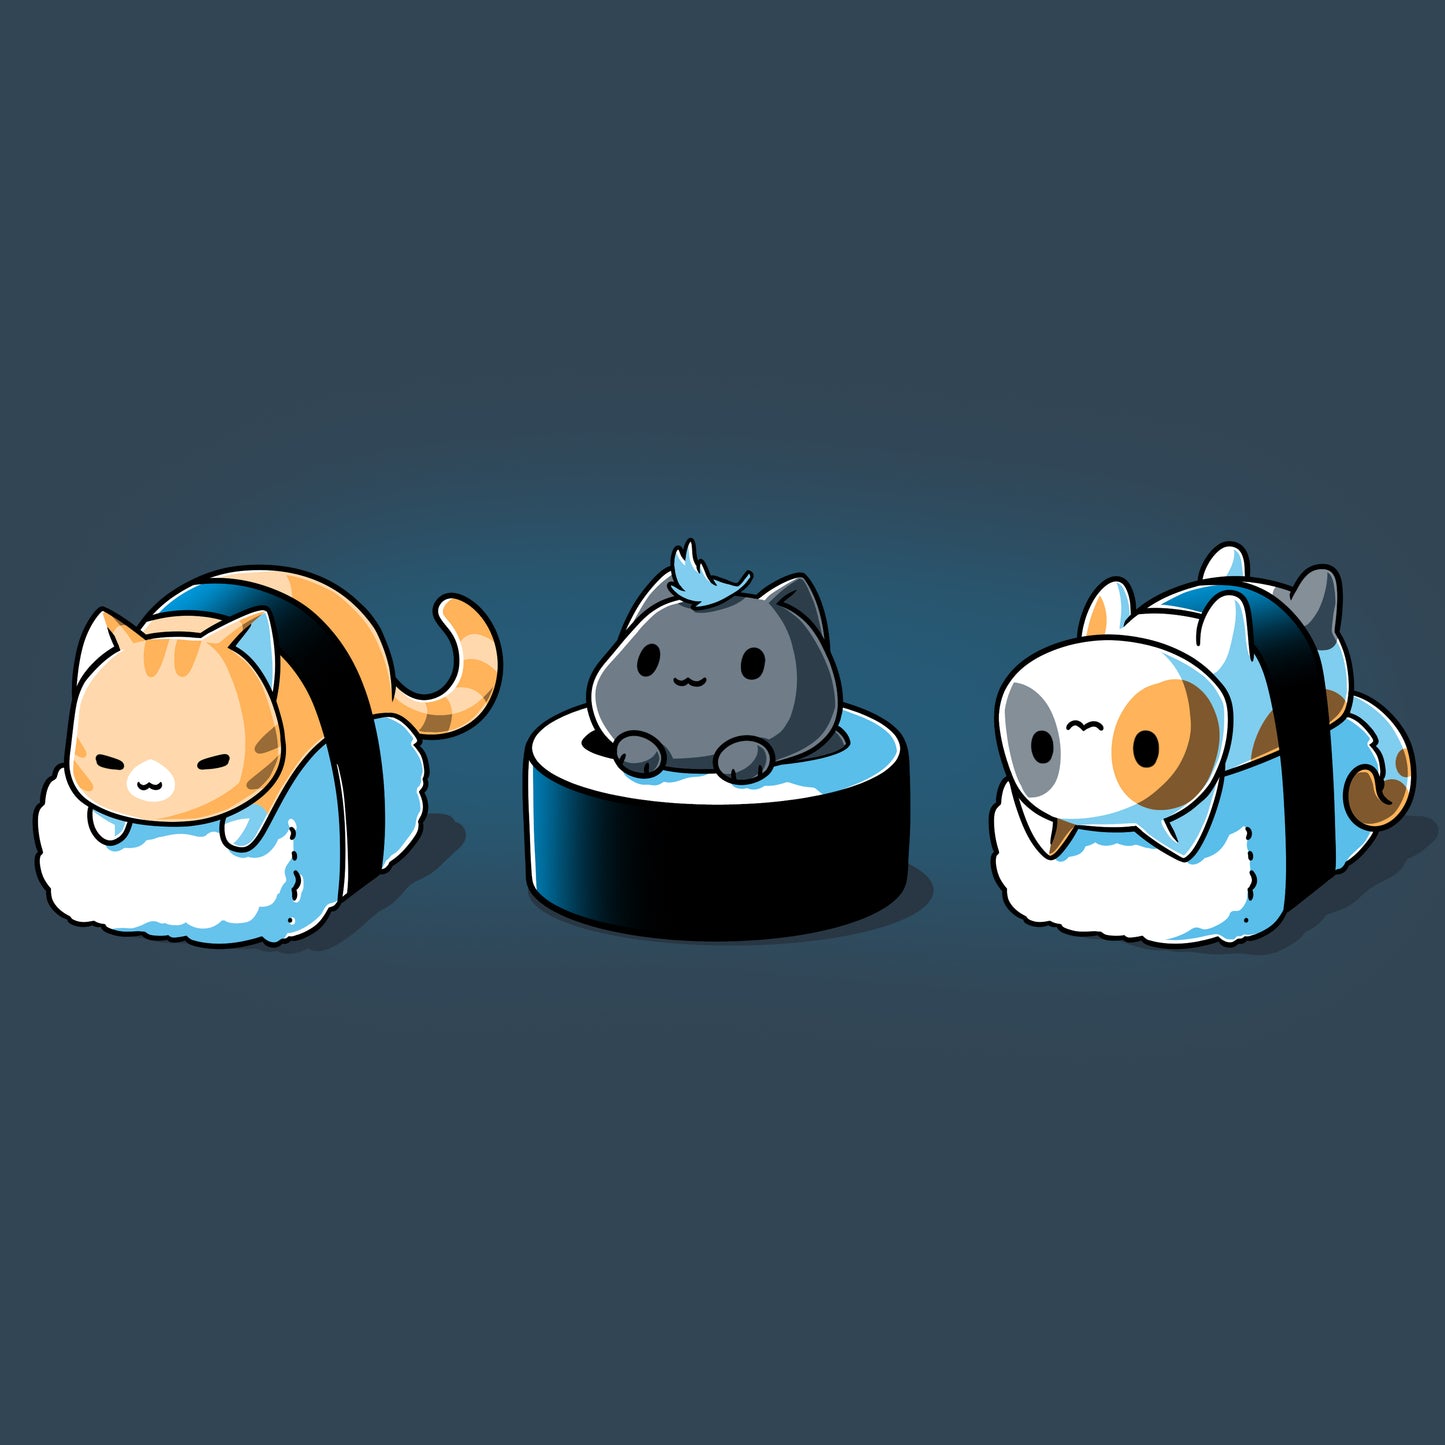 Three Sushi Cats by TeeTurtle sitting on top of each other on a dark background.